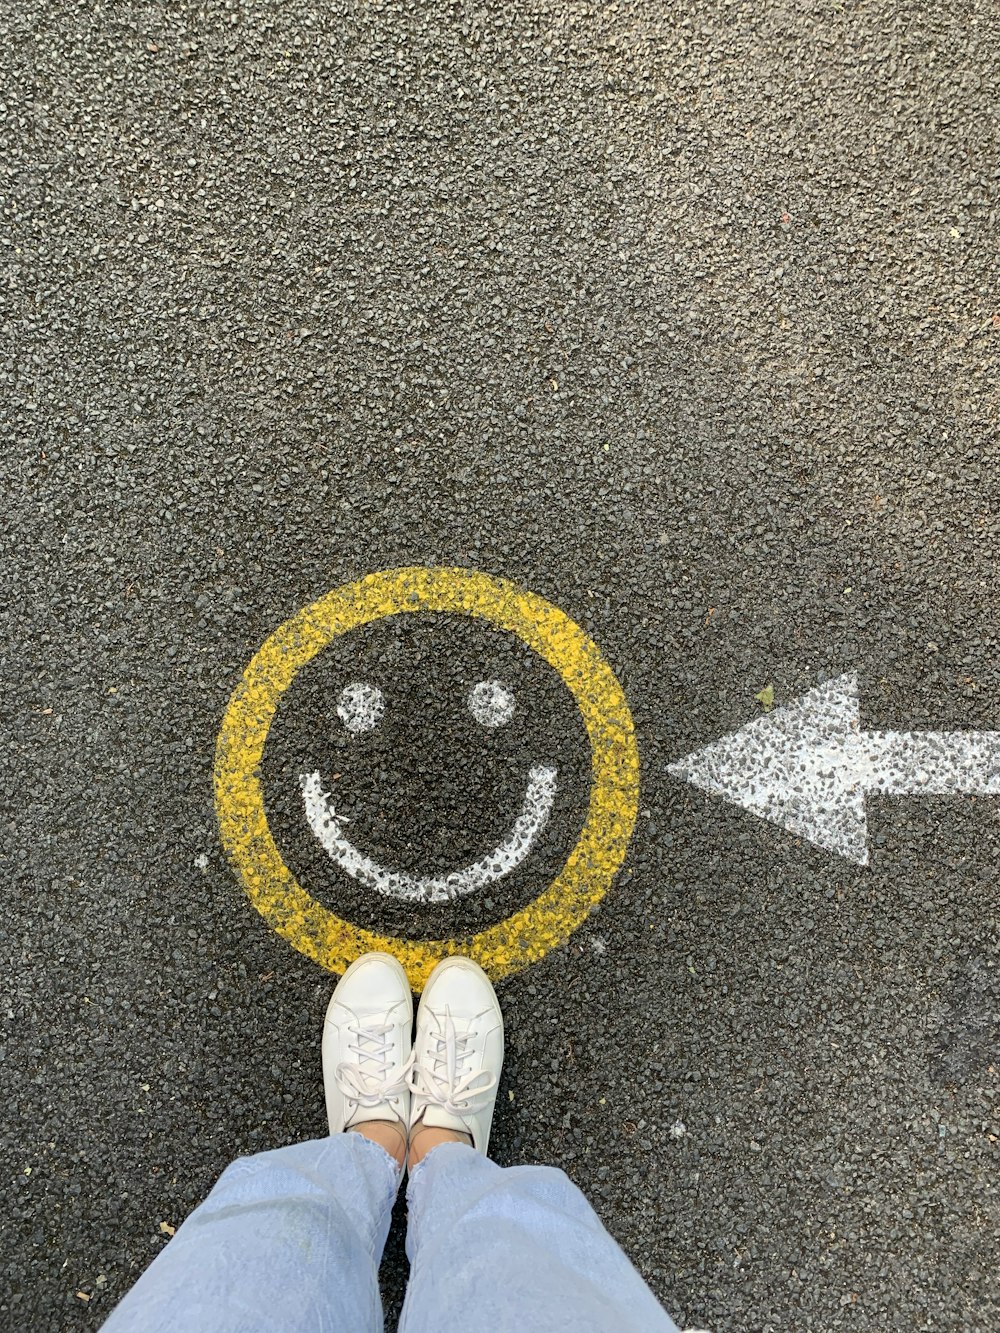 500+ Smiley Face Pictures | Download Free Images on Unsplash